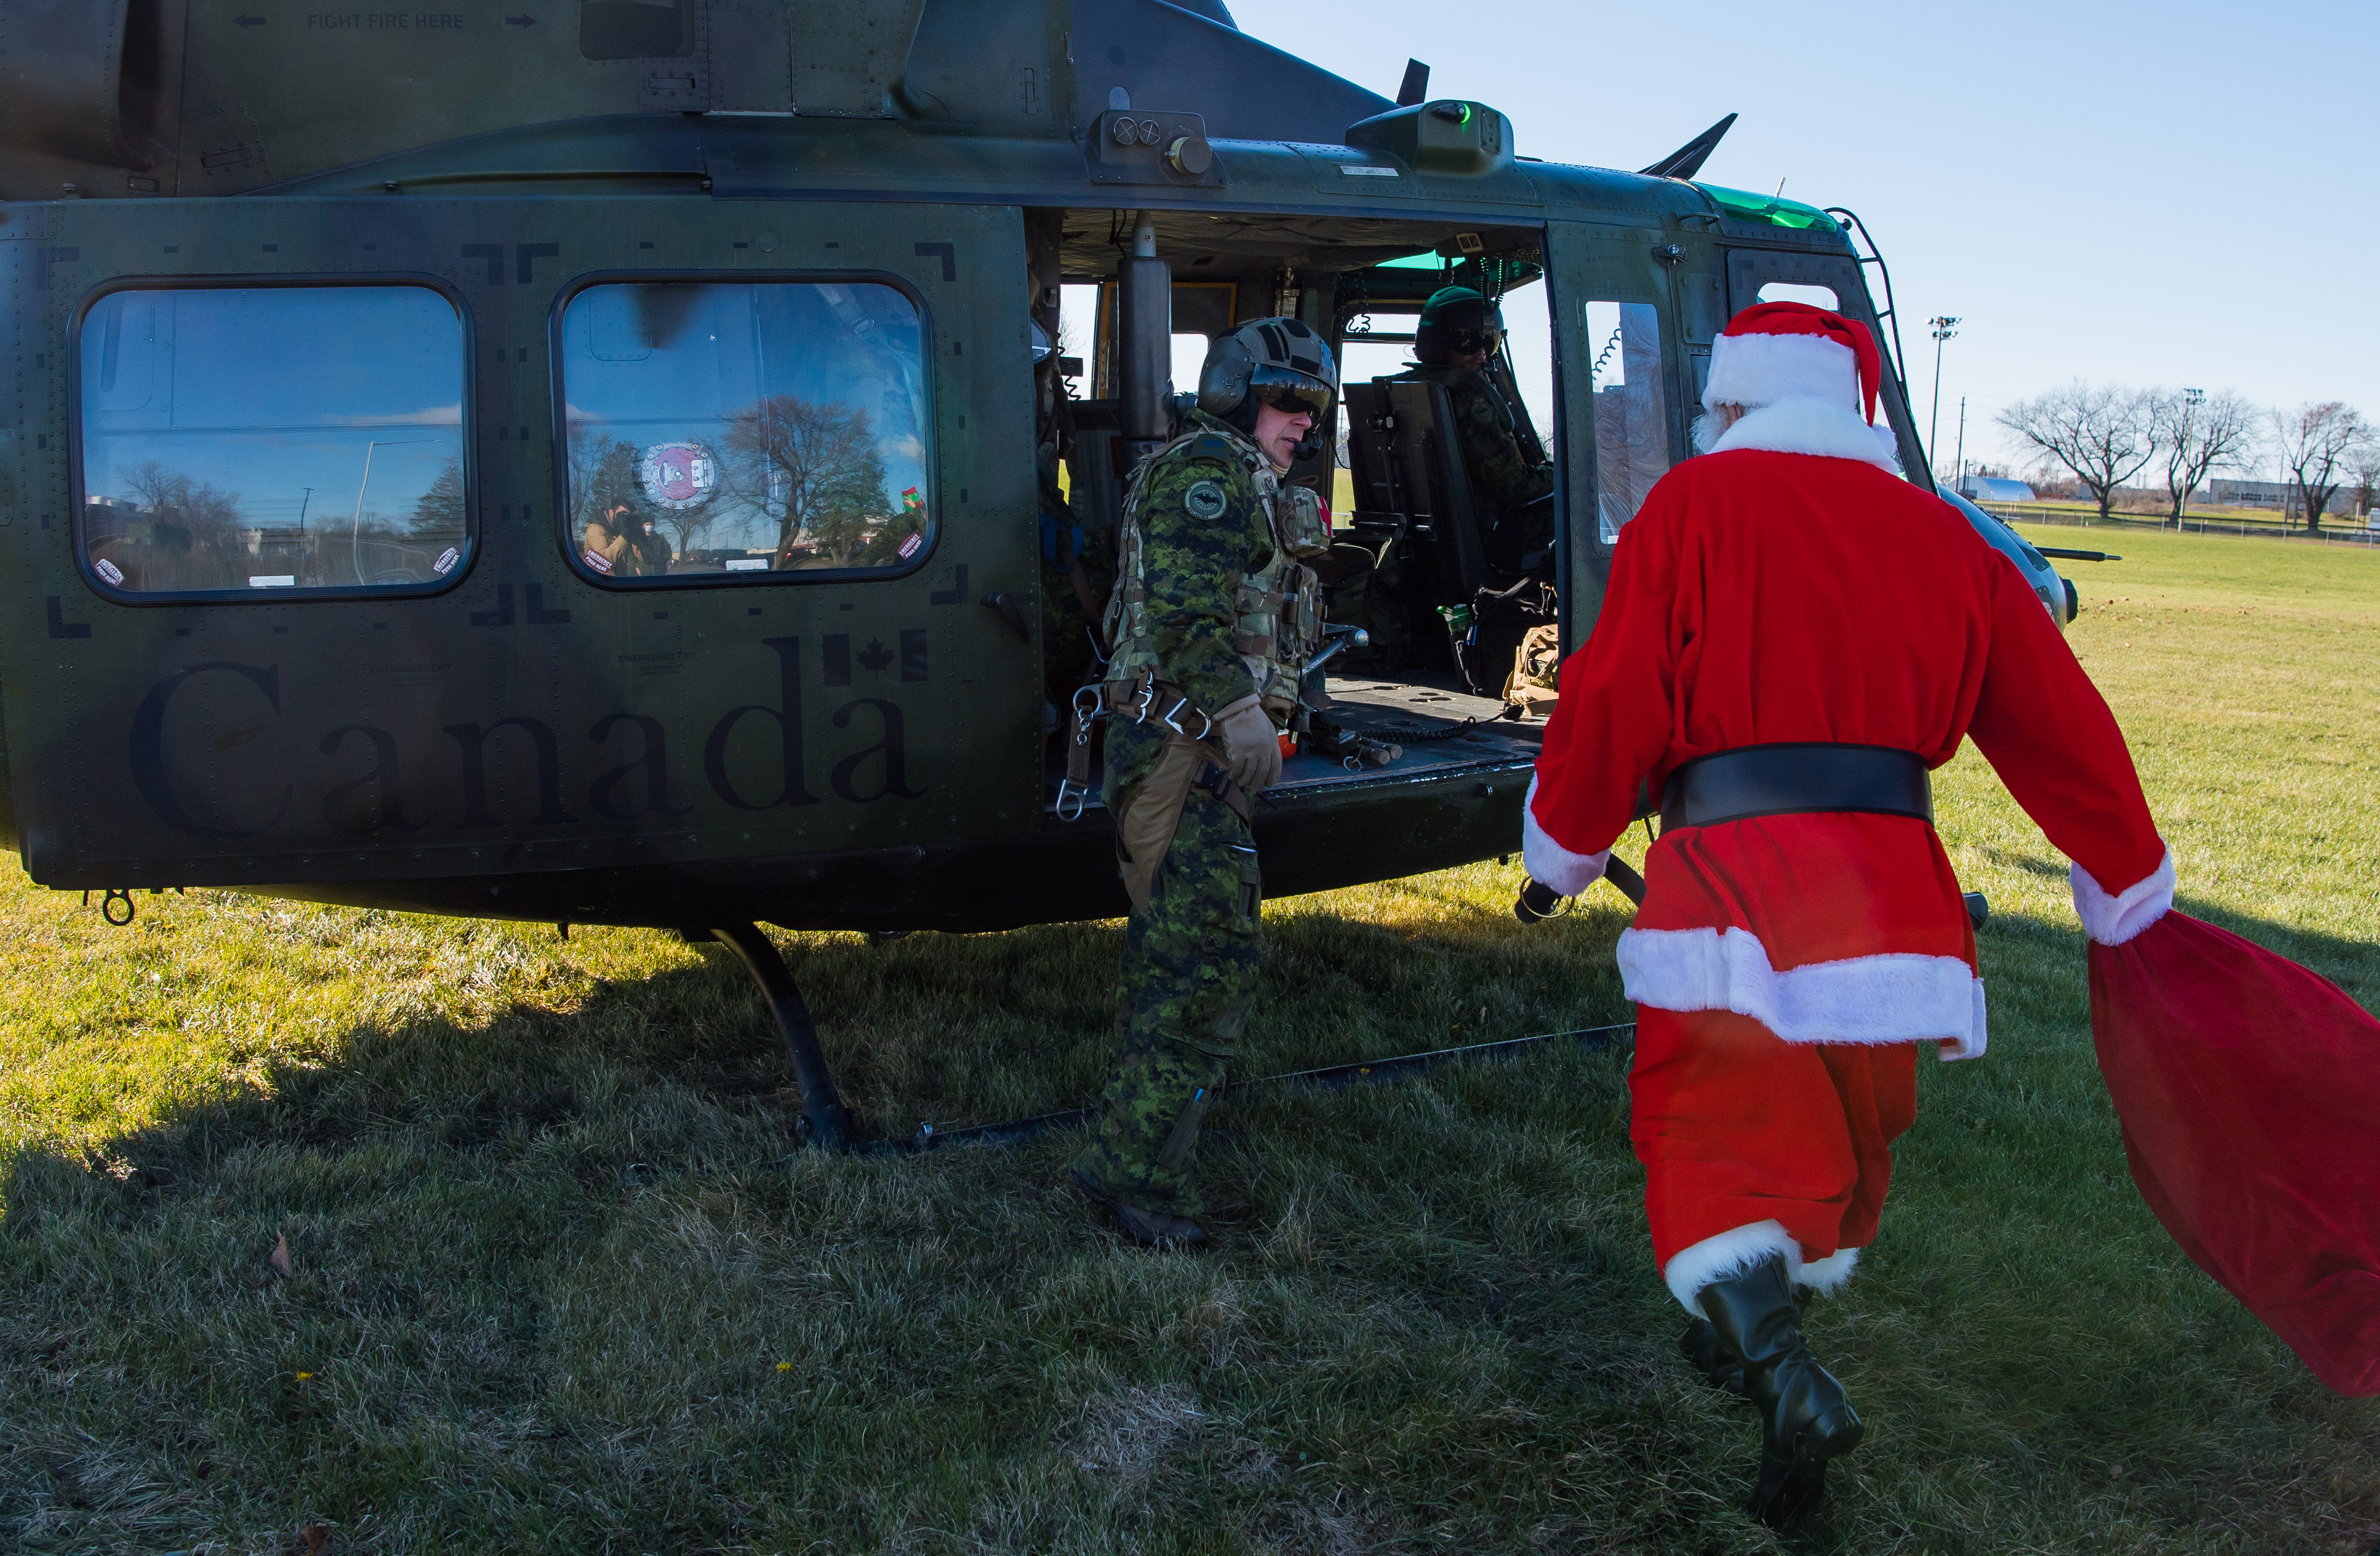 Santa with the help of a One Wing Air Lift and some elves volunteering from Canadian Forces Base Kingston delivers some presents to the children at Kingston General Hospital. Canadian Forces Base Kingston, Ontario. 03 December, 2021.